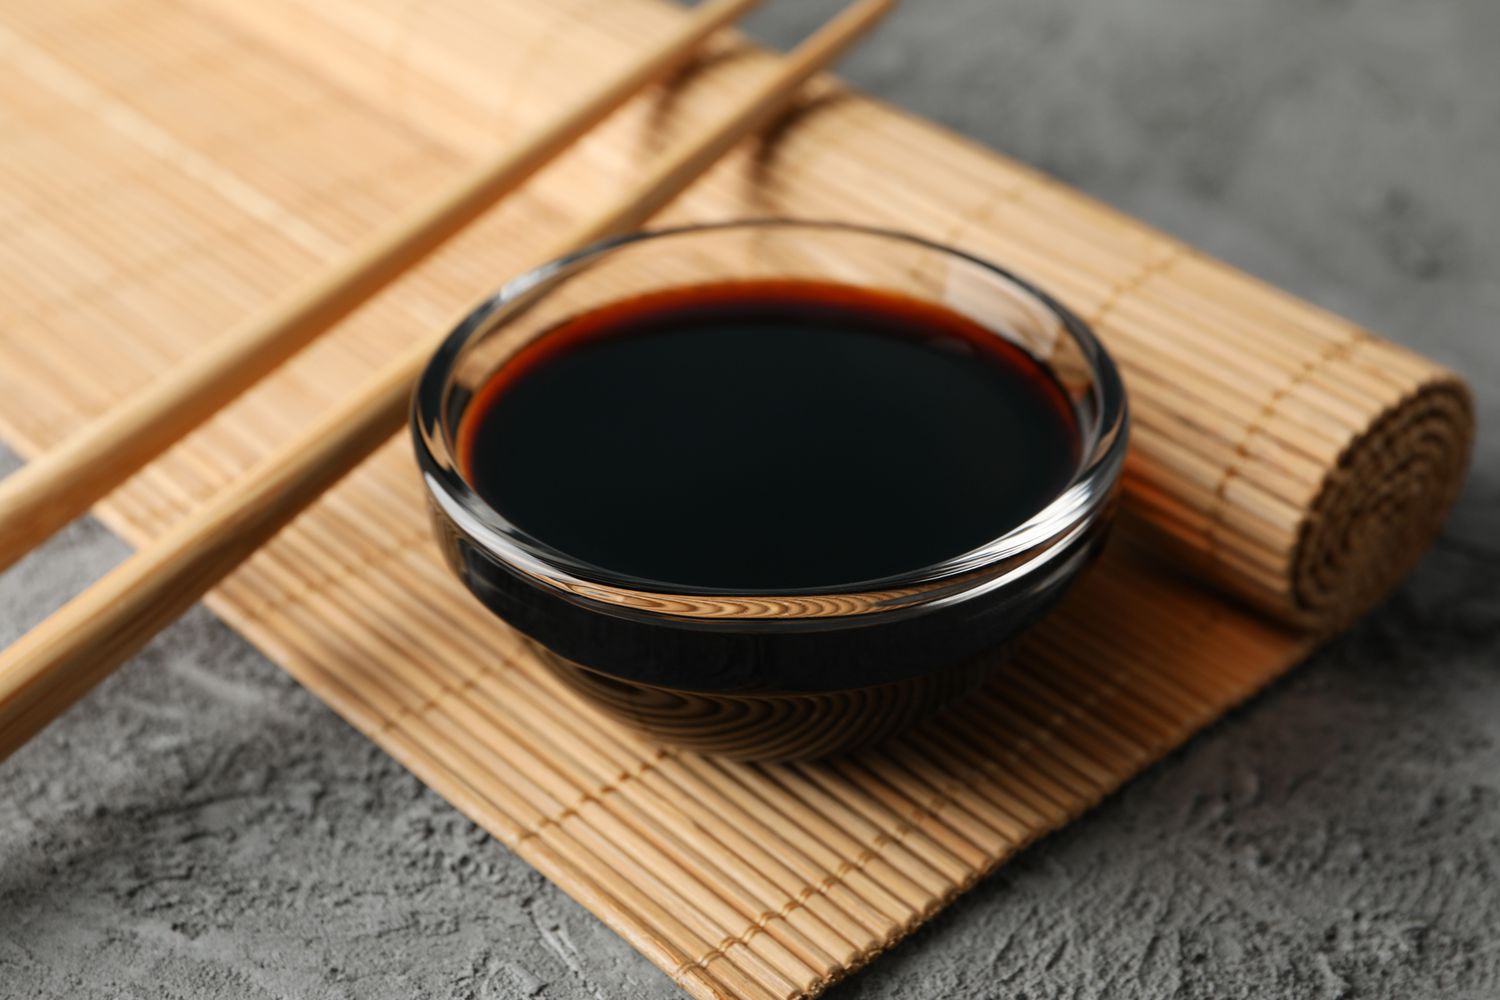 small bowl of soy sauce on Japanese sushi rolling mat with chopsticks